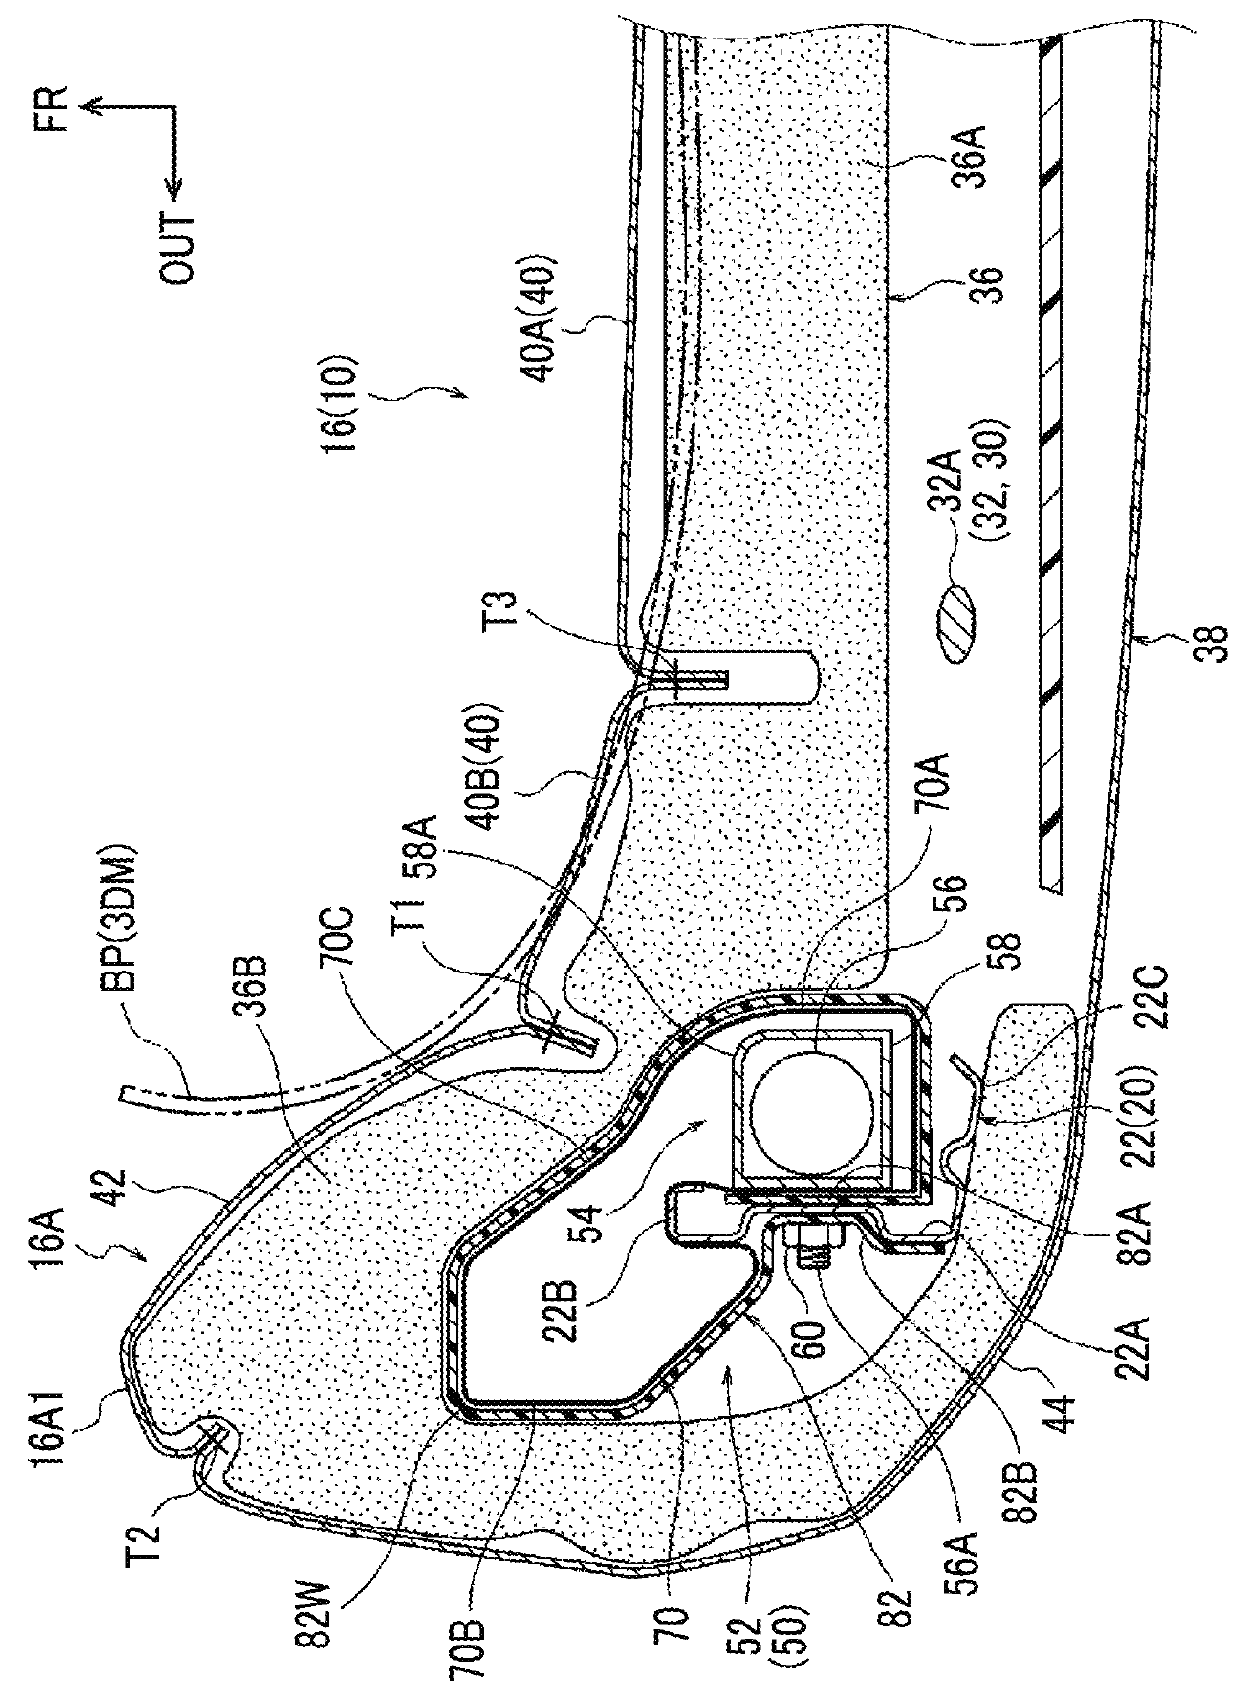 Vehicle seat with side airbag apparatus